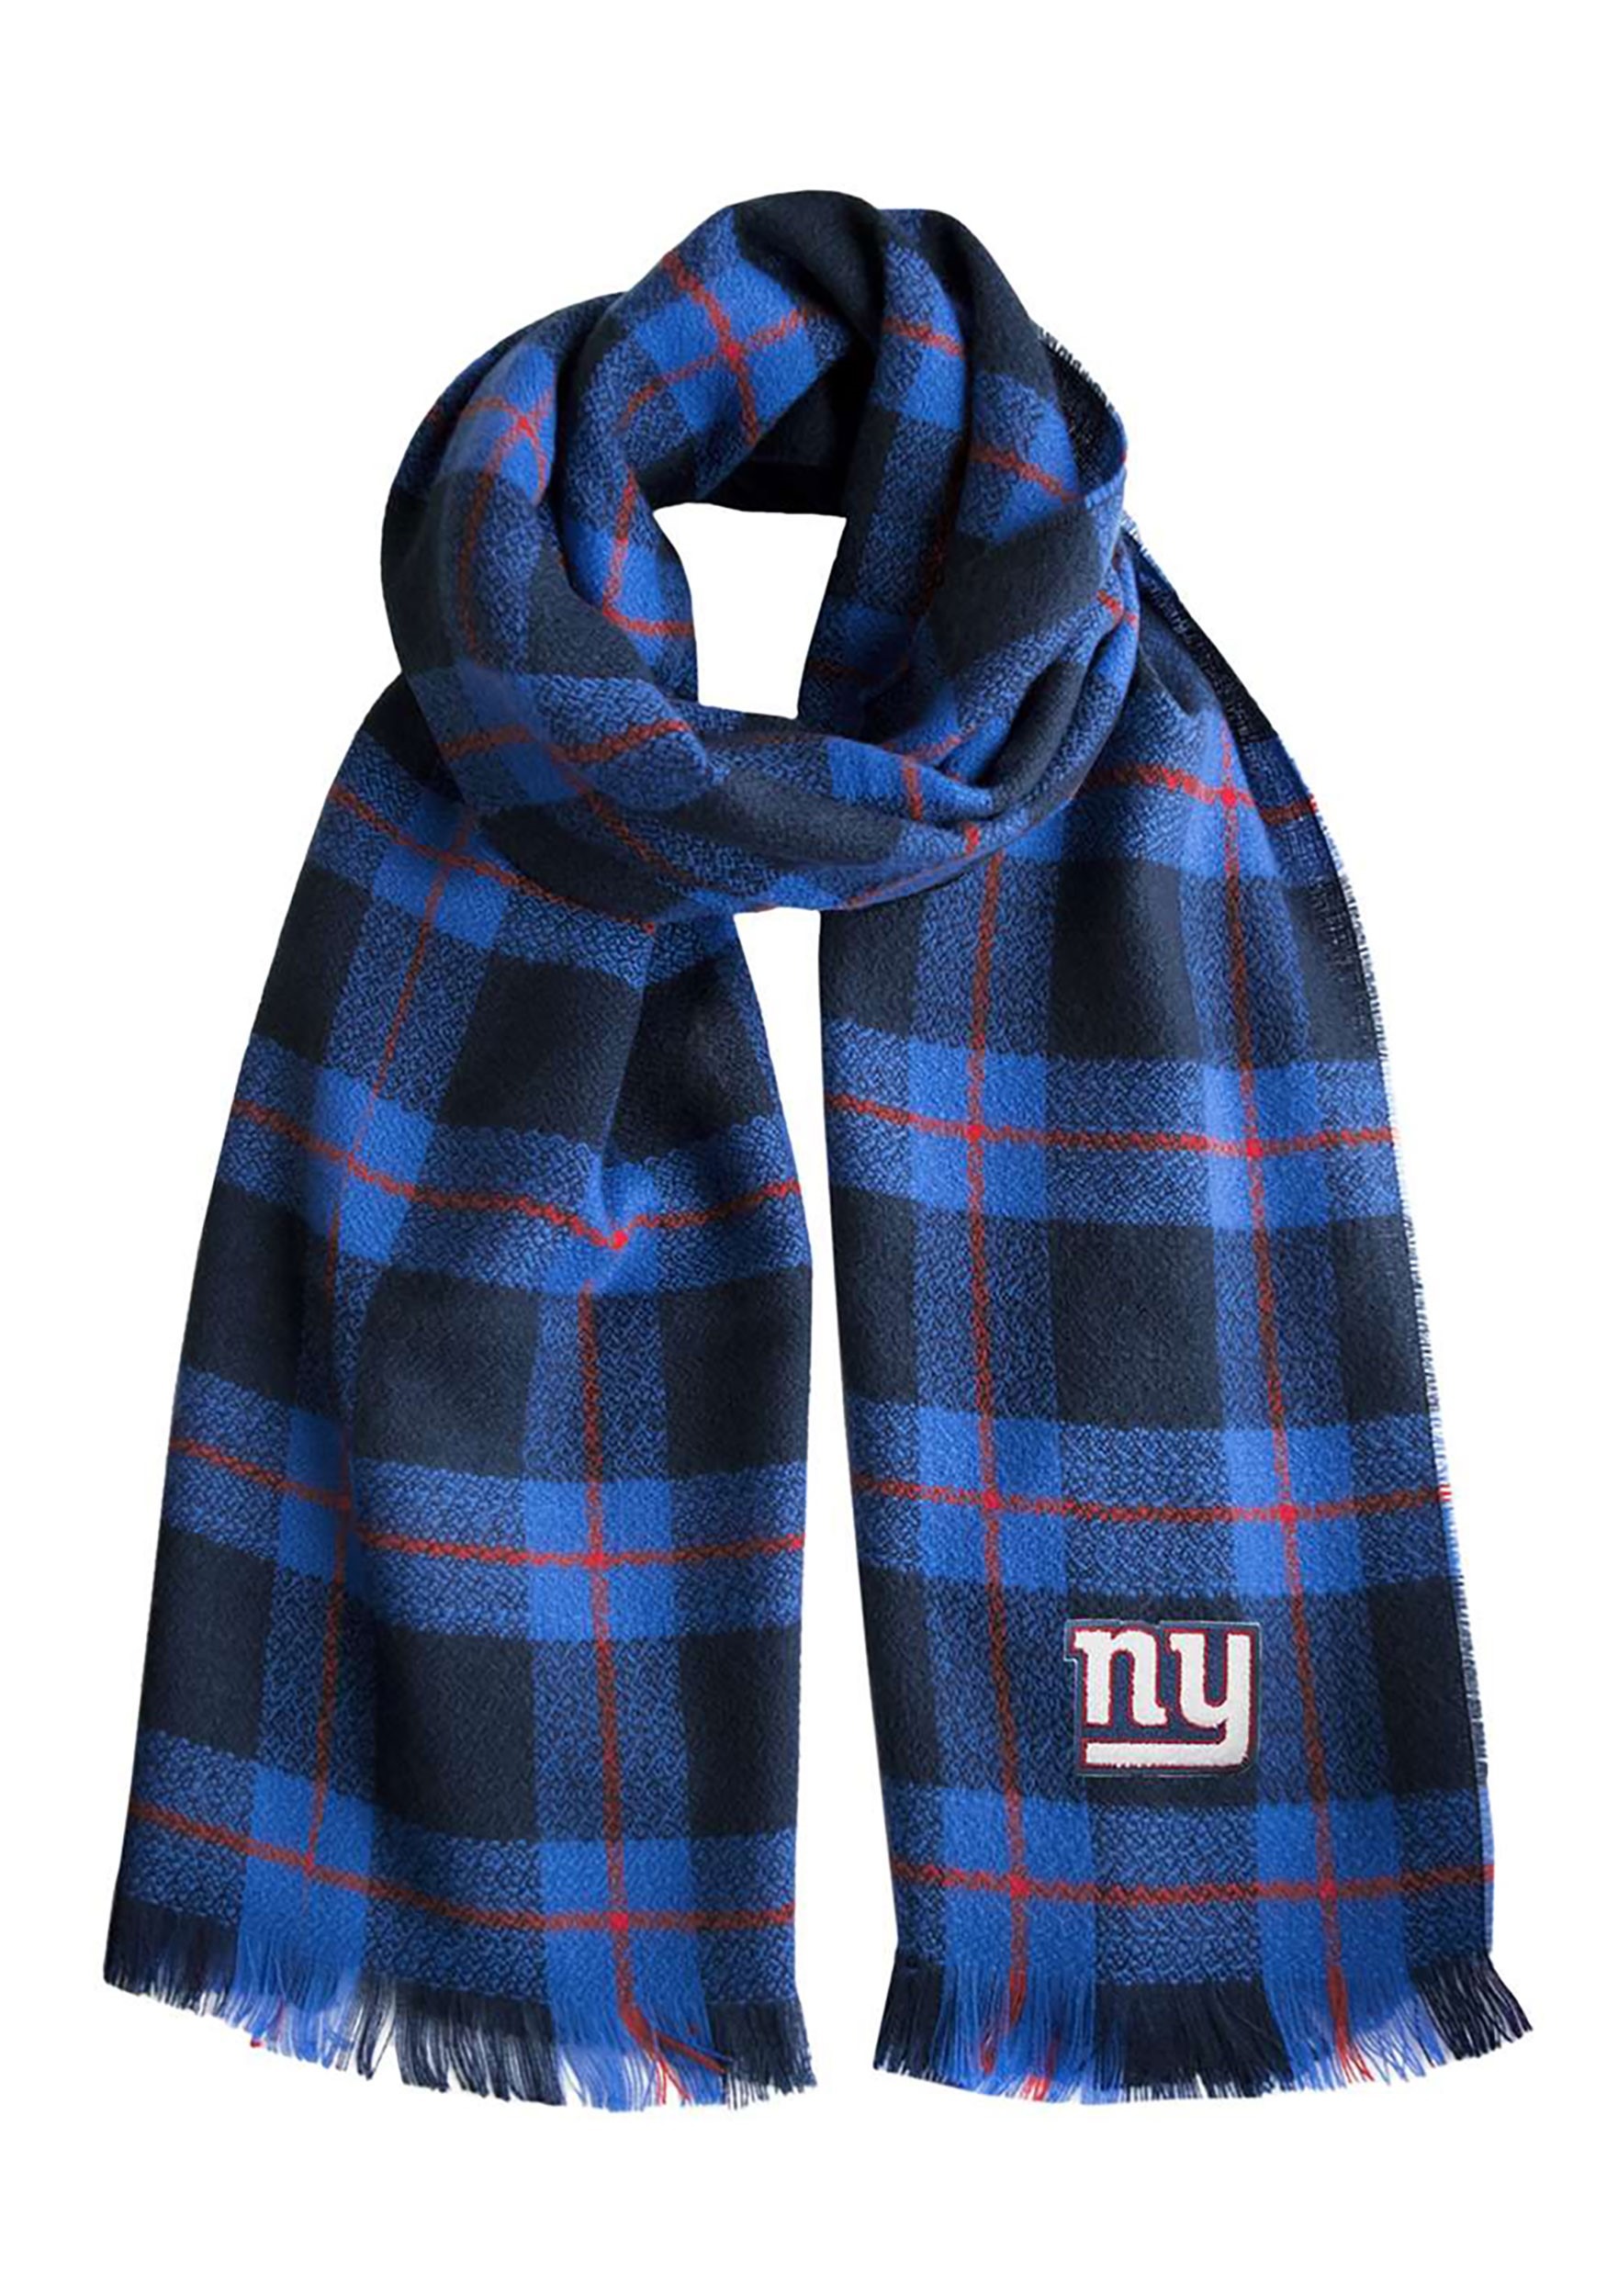 New York Giants NFL Navy And Red Plaid Blanket Scarf